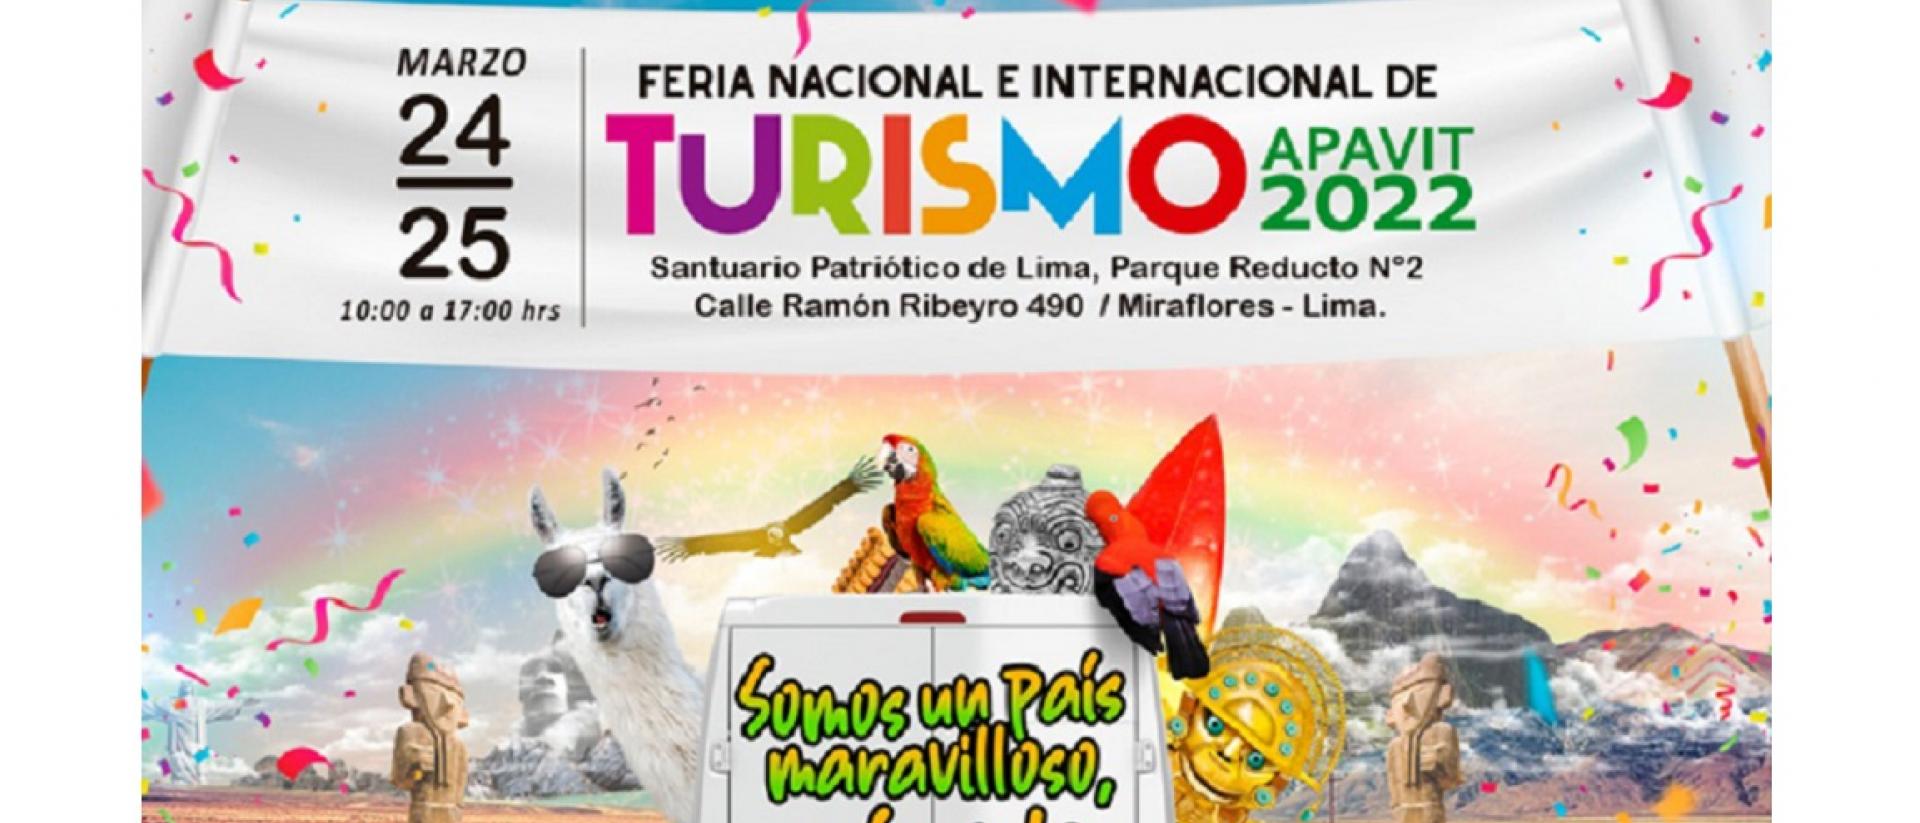 The National and International Tourism Fair is organized in Peru